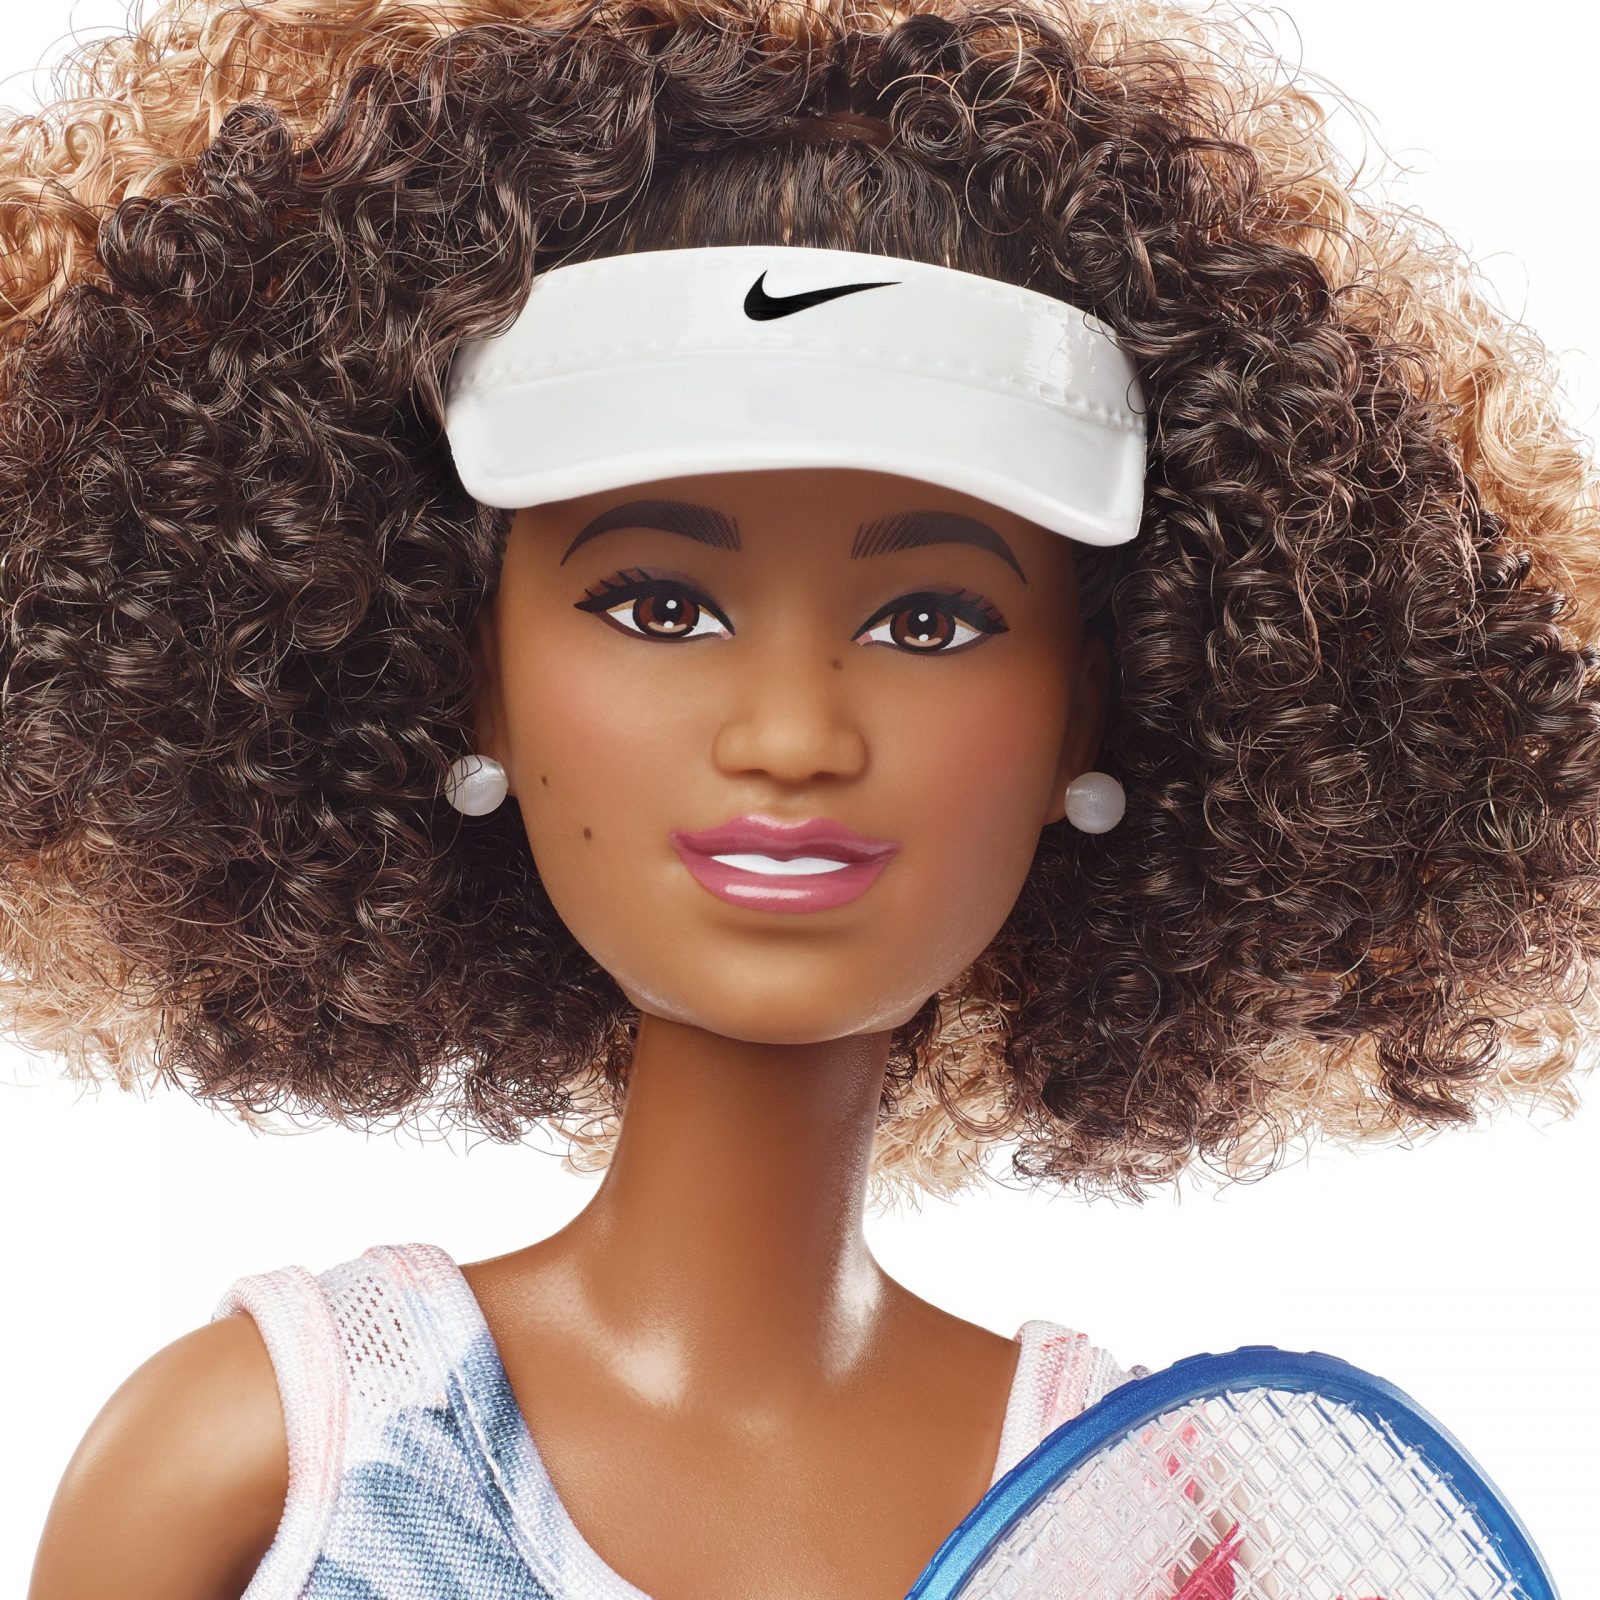 Exclusive: Barbie Launches Naomi Osaka Doll Ahead Of 2021 Olympics